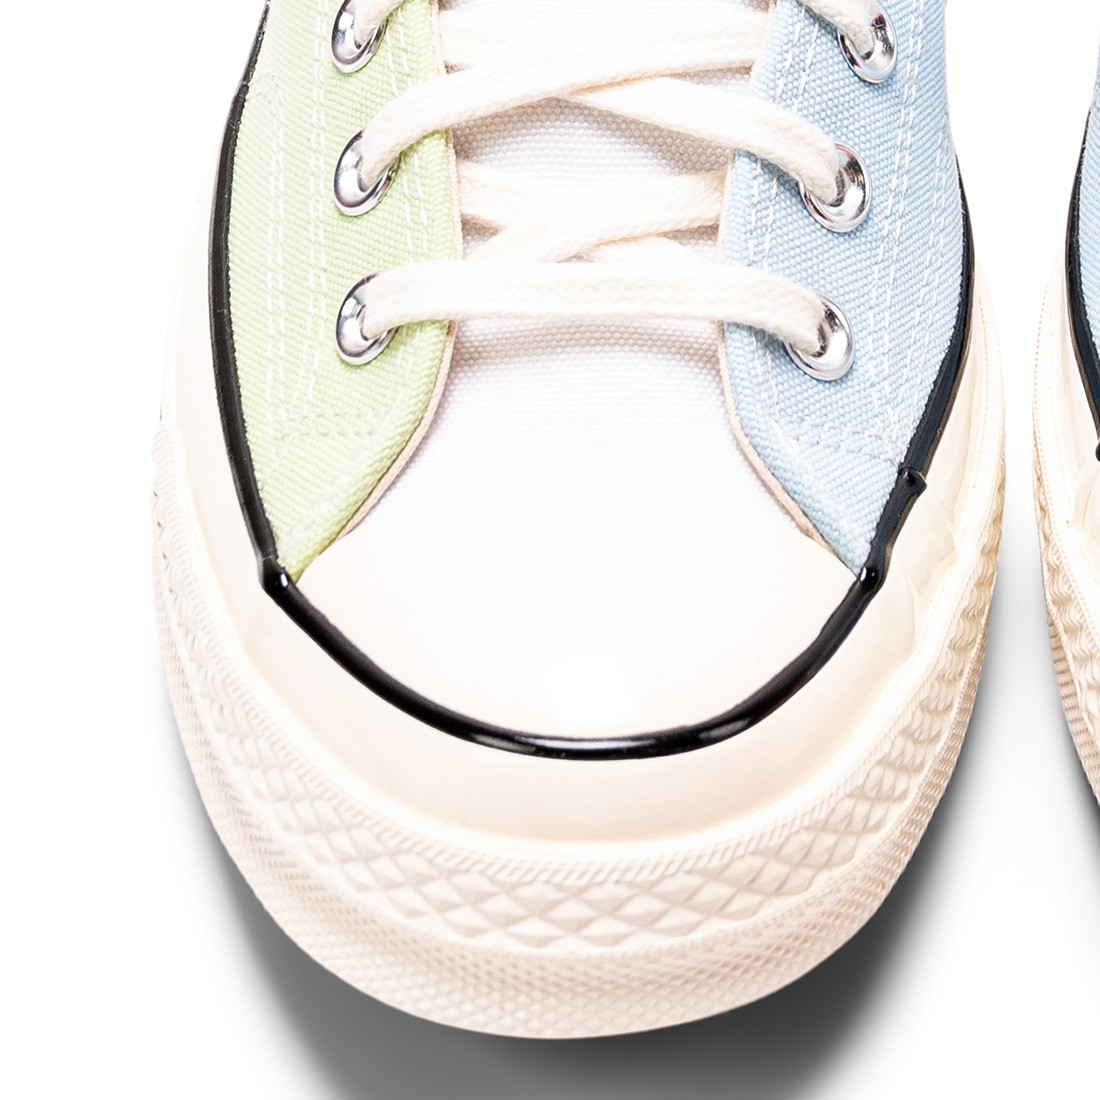 The boat-like and ultra-comfy Converse